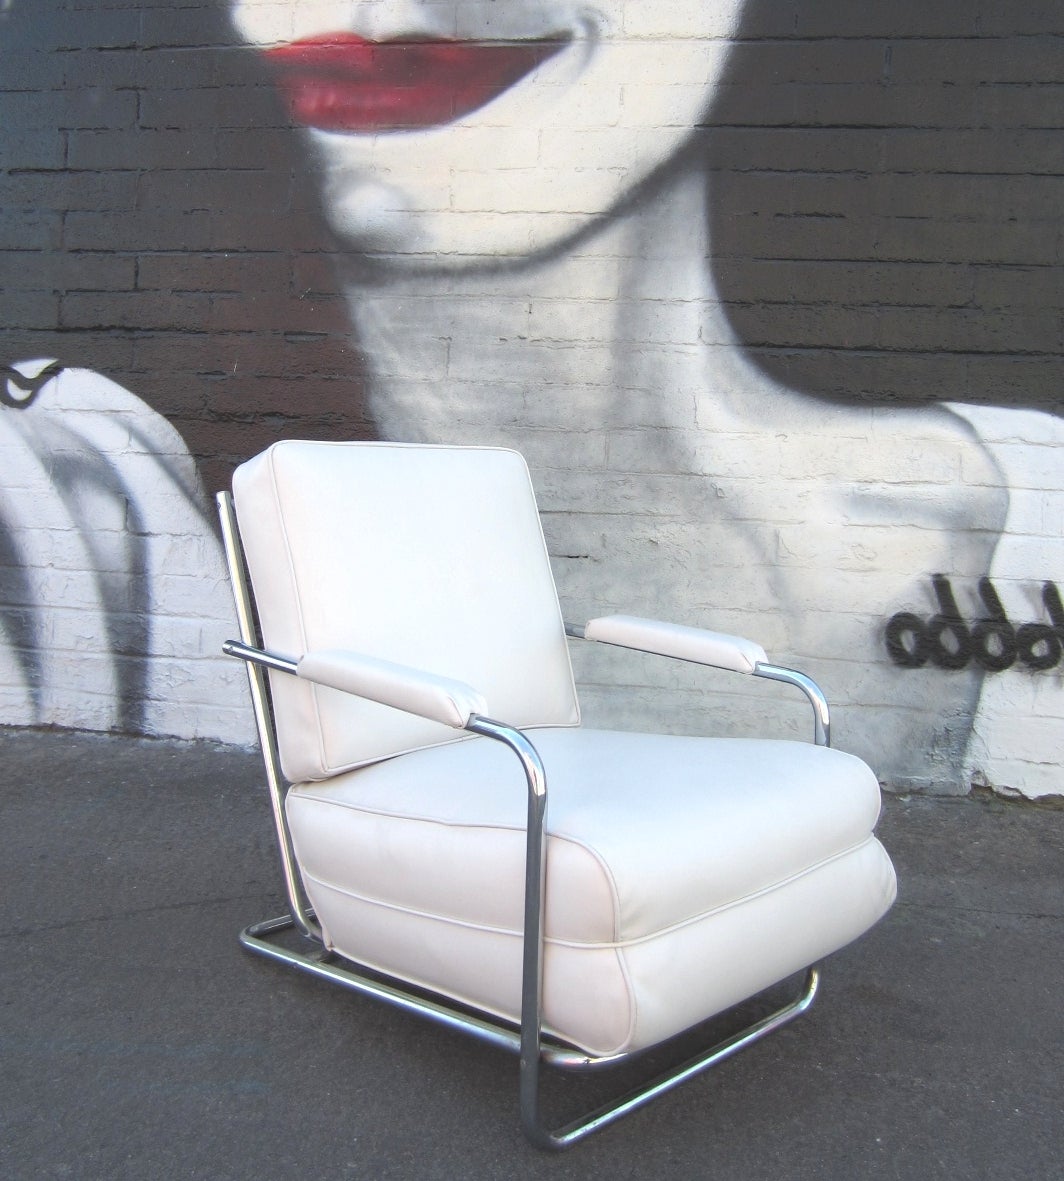 Gilbert Rohde design chrome tubing lounge chair by the Troy Sunshade Company, circa 1930s.
Newly upholstered in pure white vinyl over it's original cotton batting and horsehair cushion.
